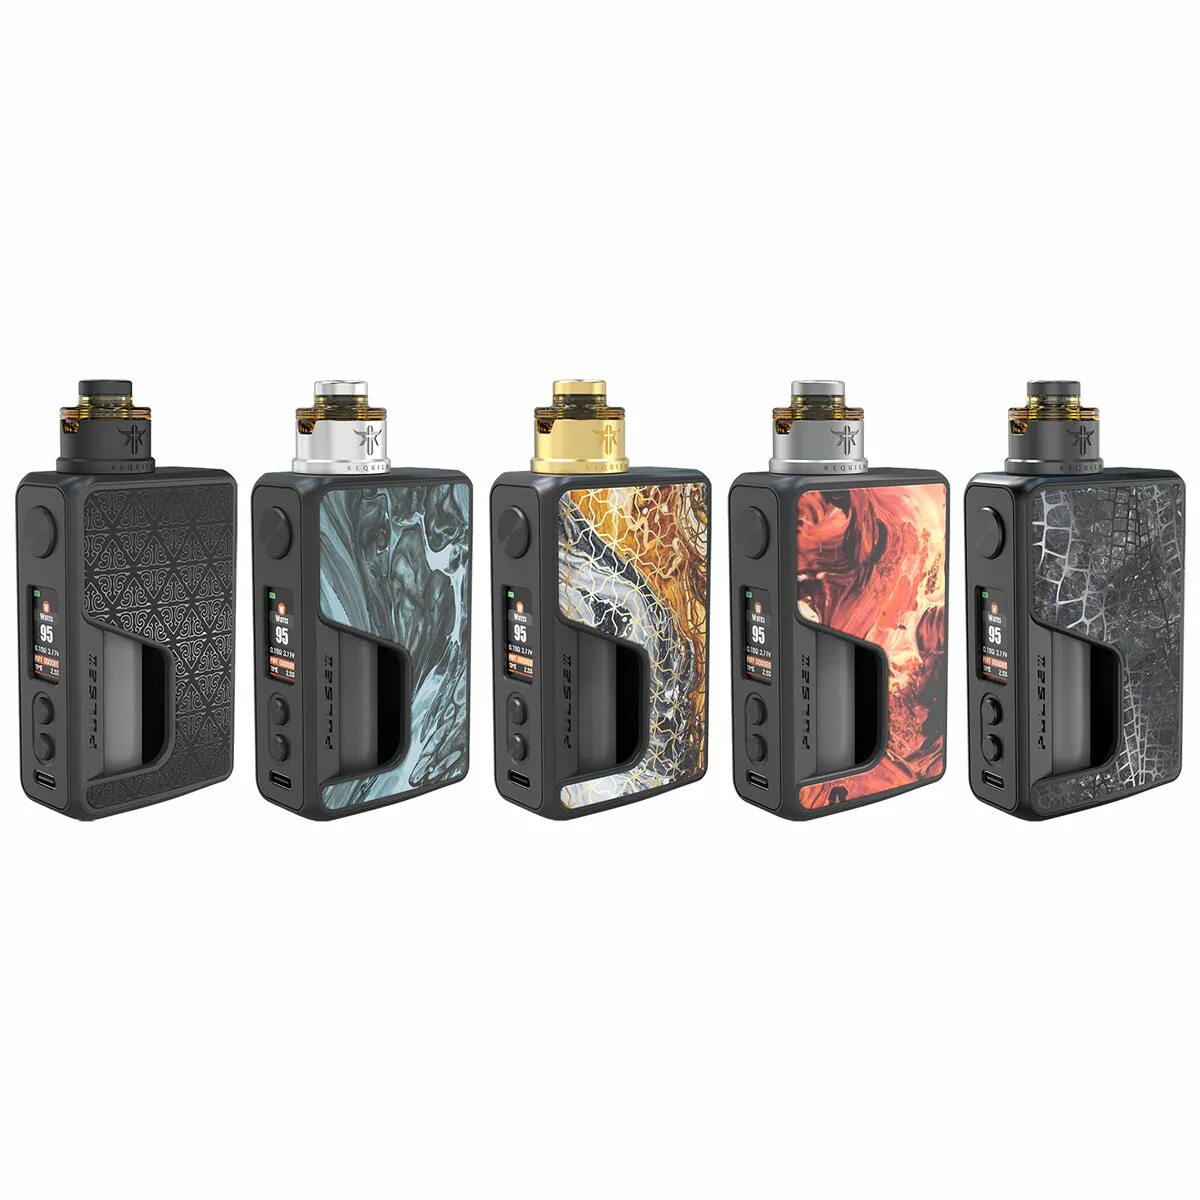 Lost Vape Hyperion DNA 100c боксмод. Lost Vape Hyperion. PR se Kit. Jeiiybox se Kit.